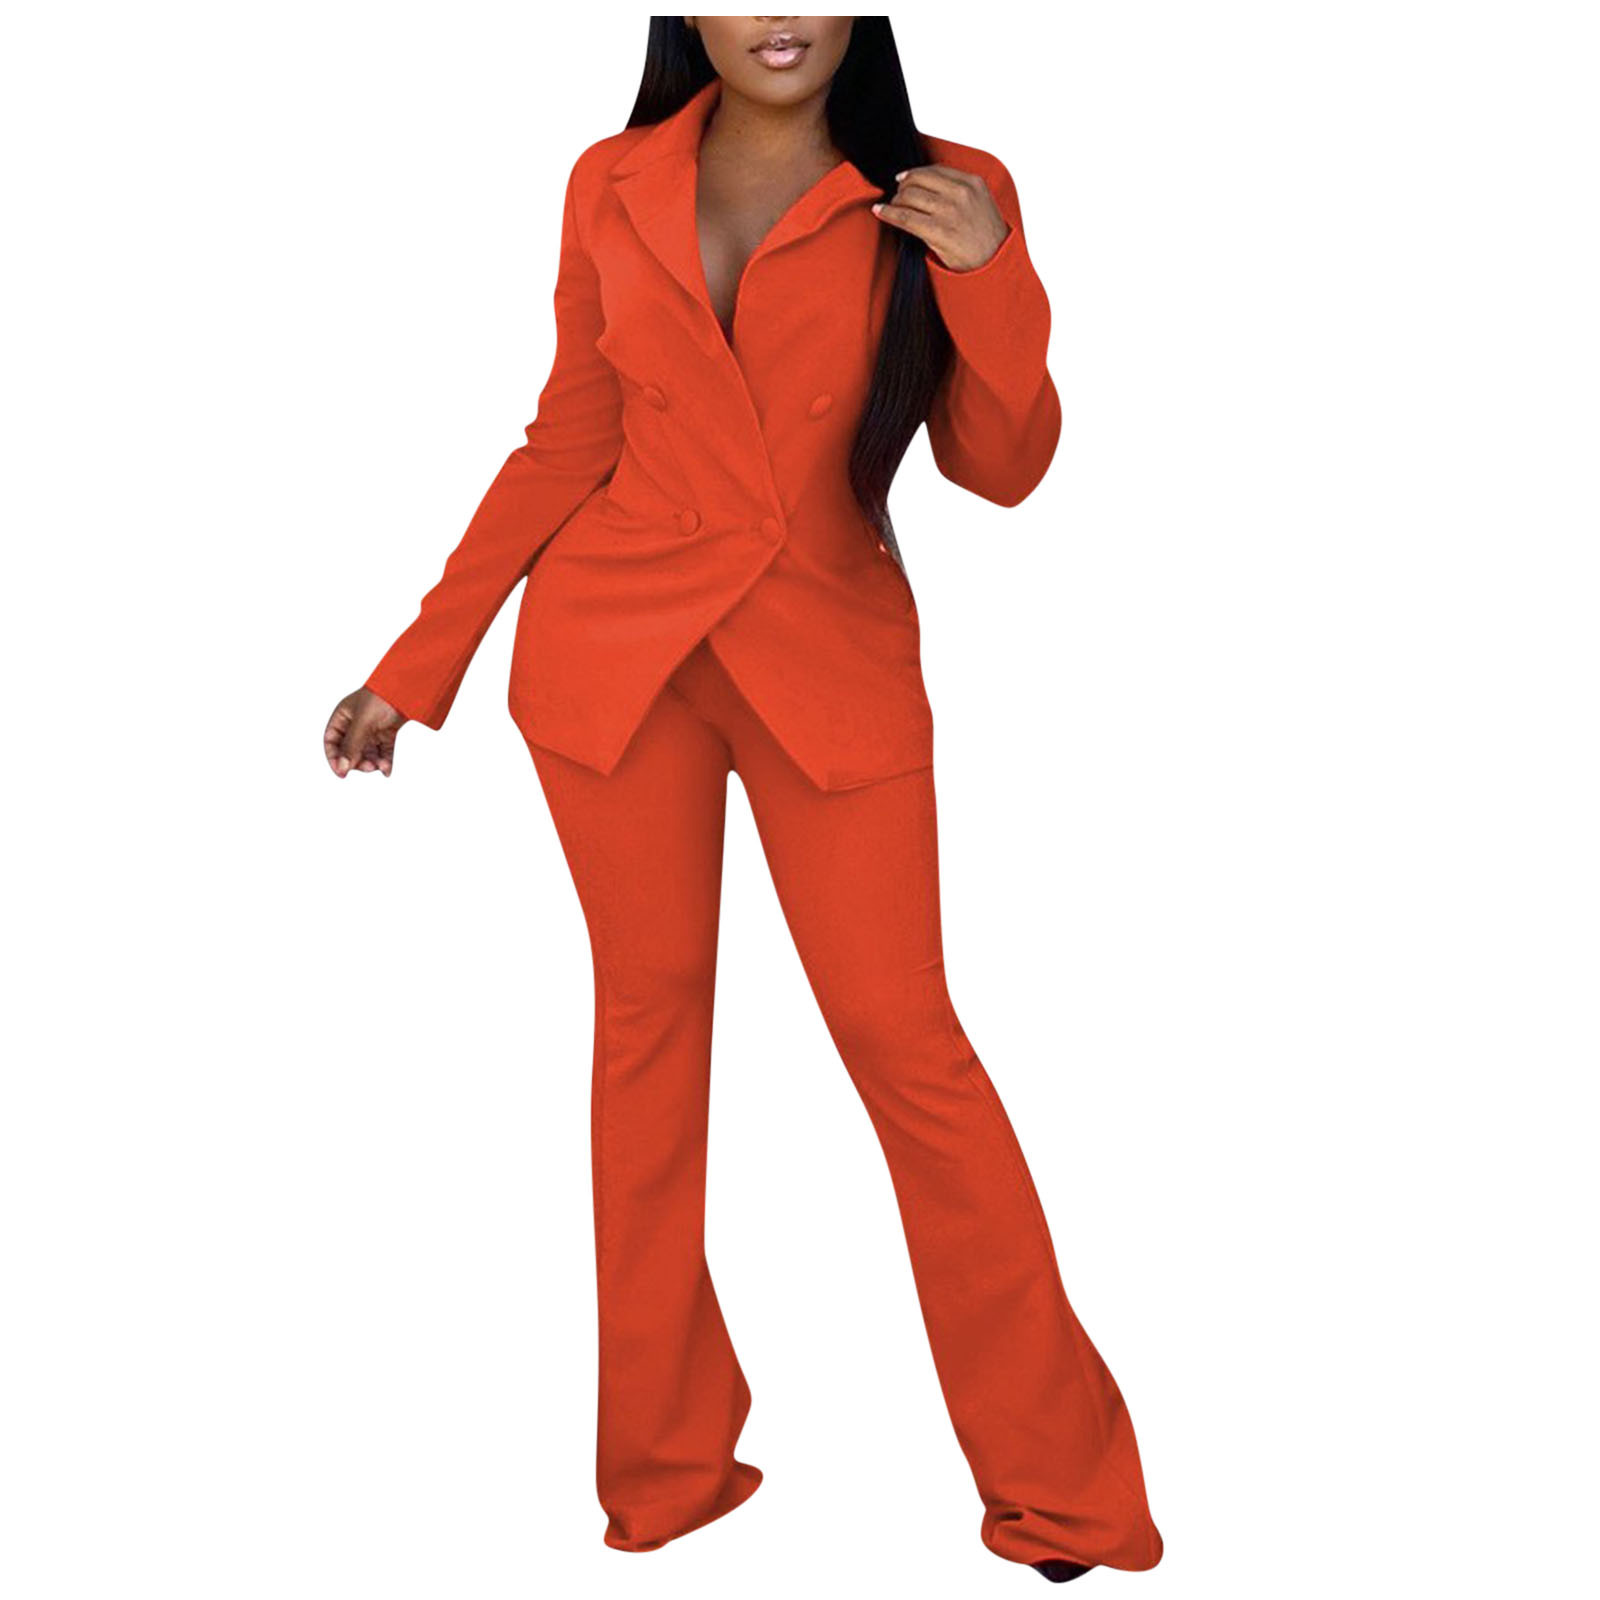 Bdfzl Women's Business Blazer Suit Ruffles Long Sleeves Two Piece Solid ...